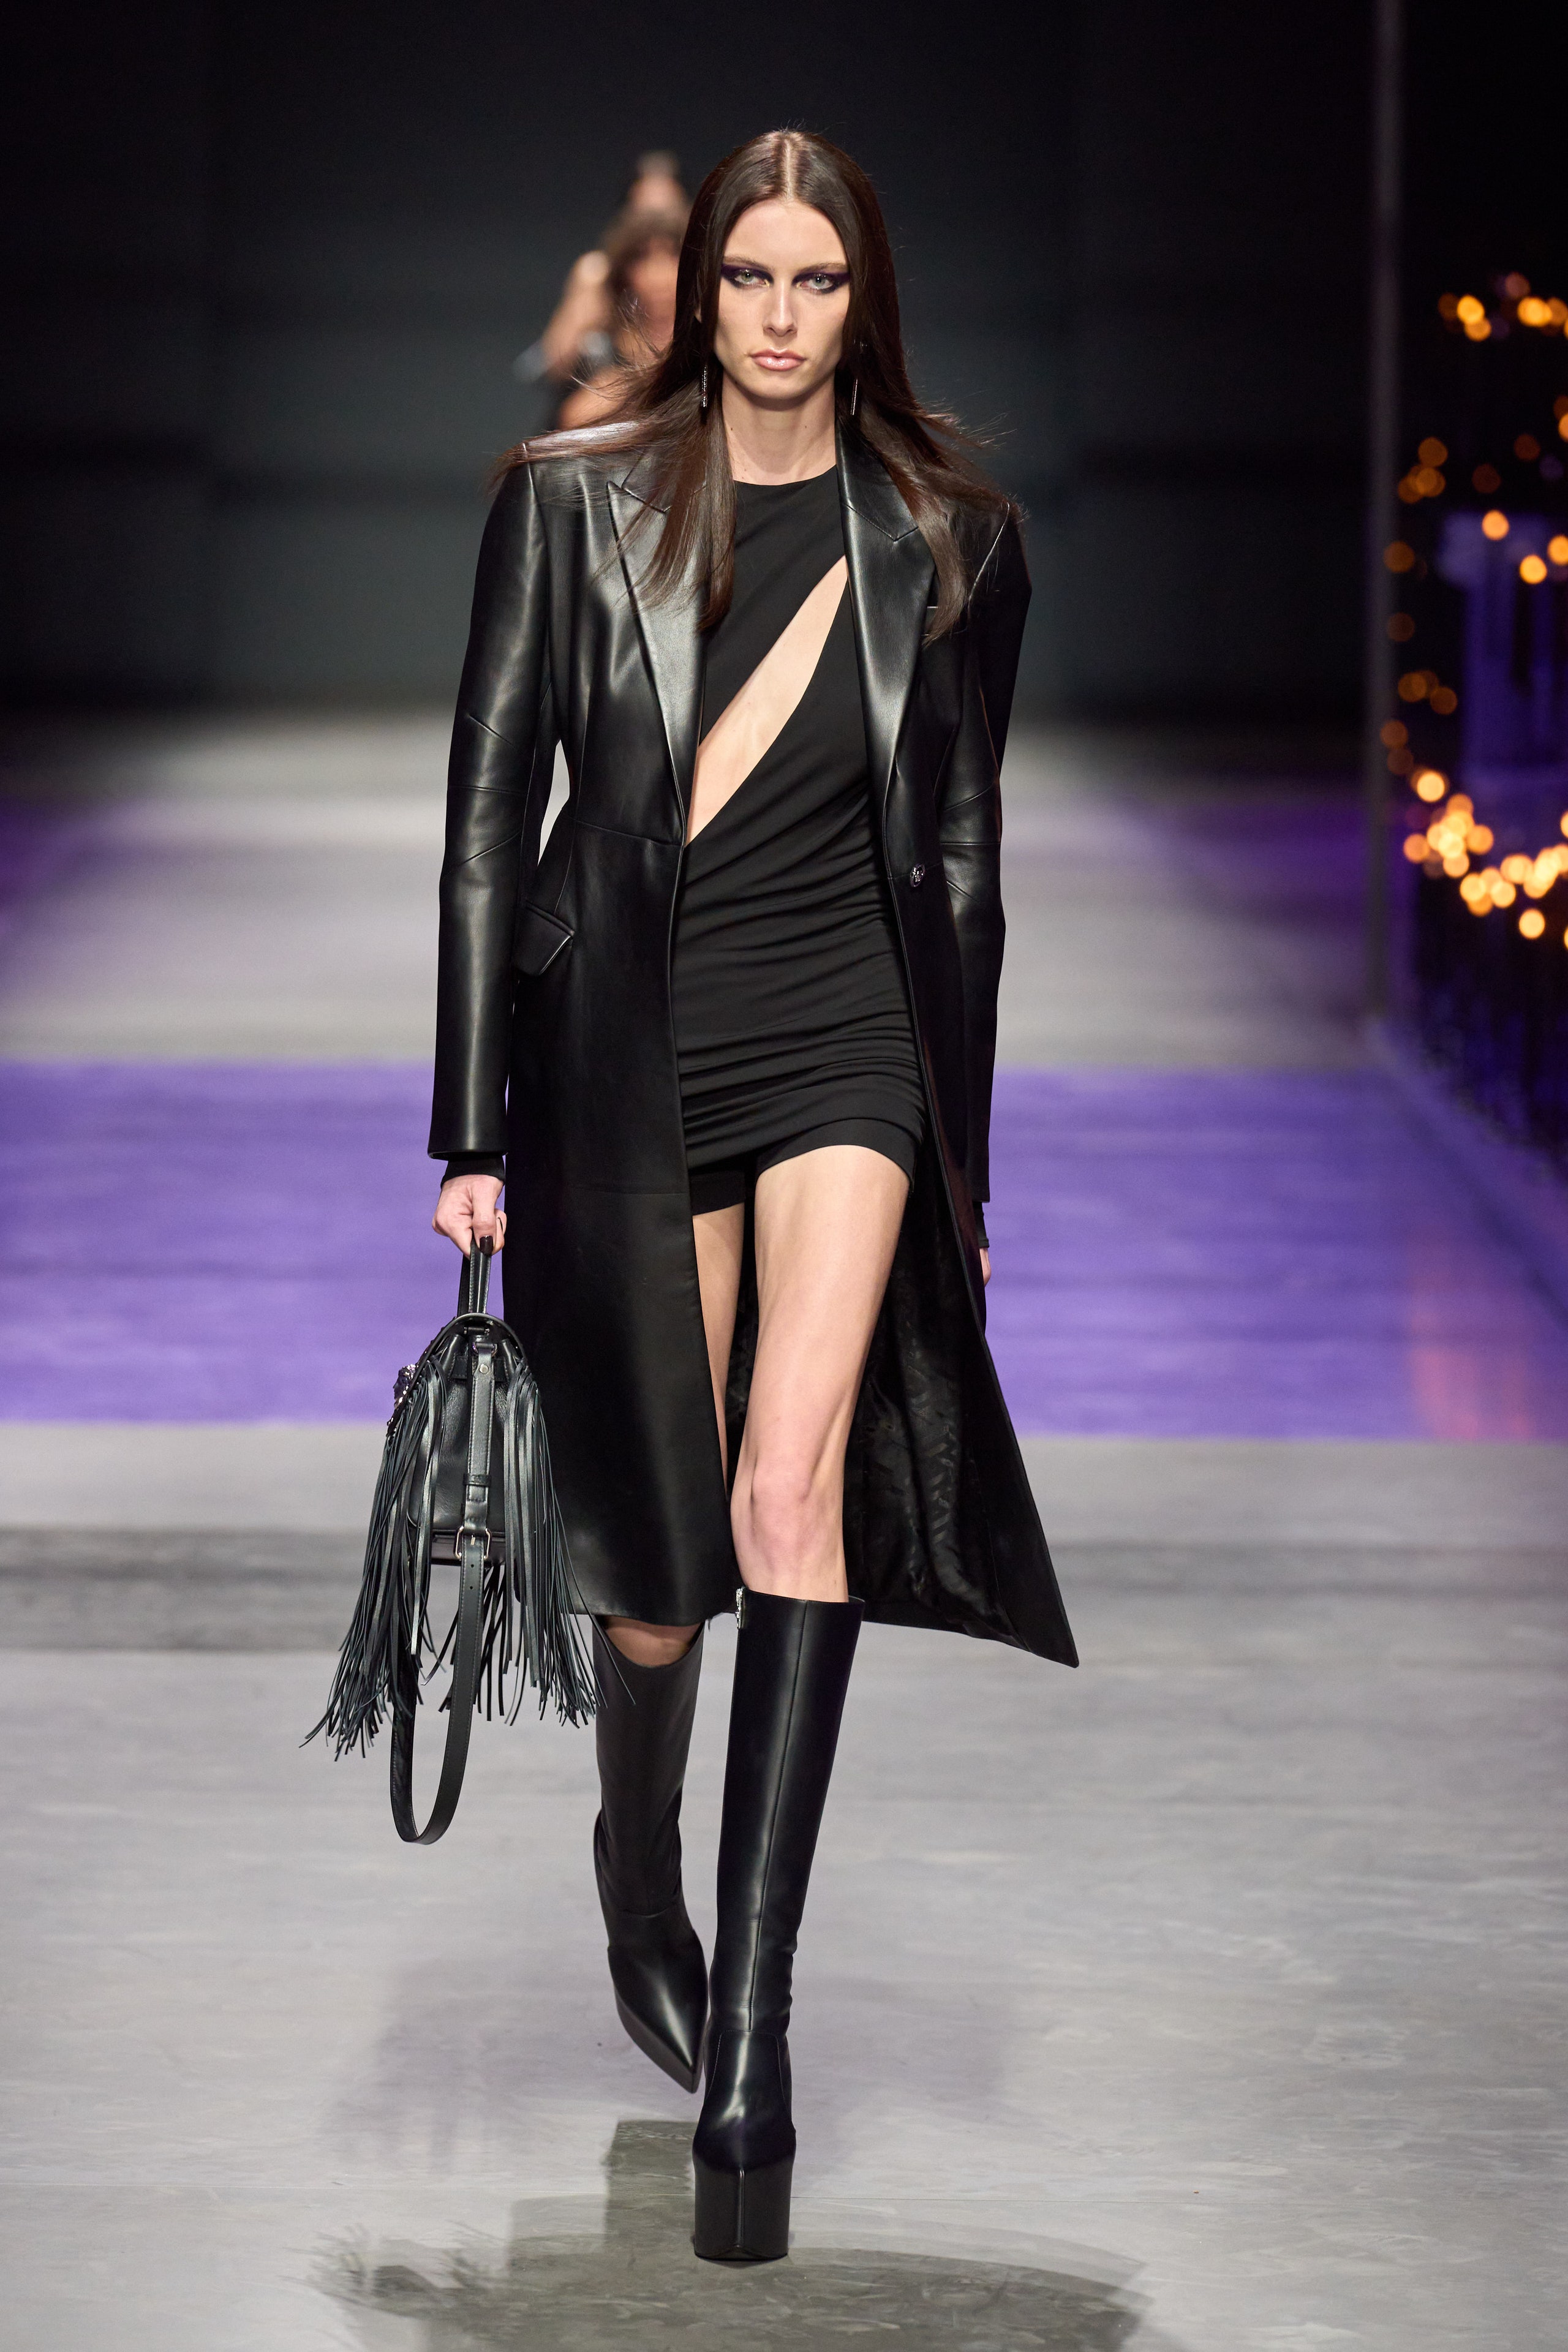 Versace's Spring/Summer 2023 collection presents a fashion show that